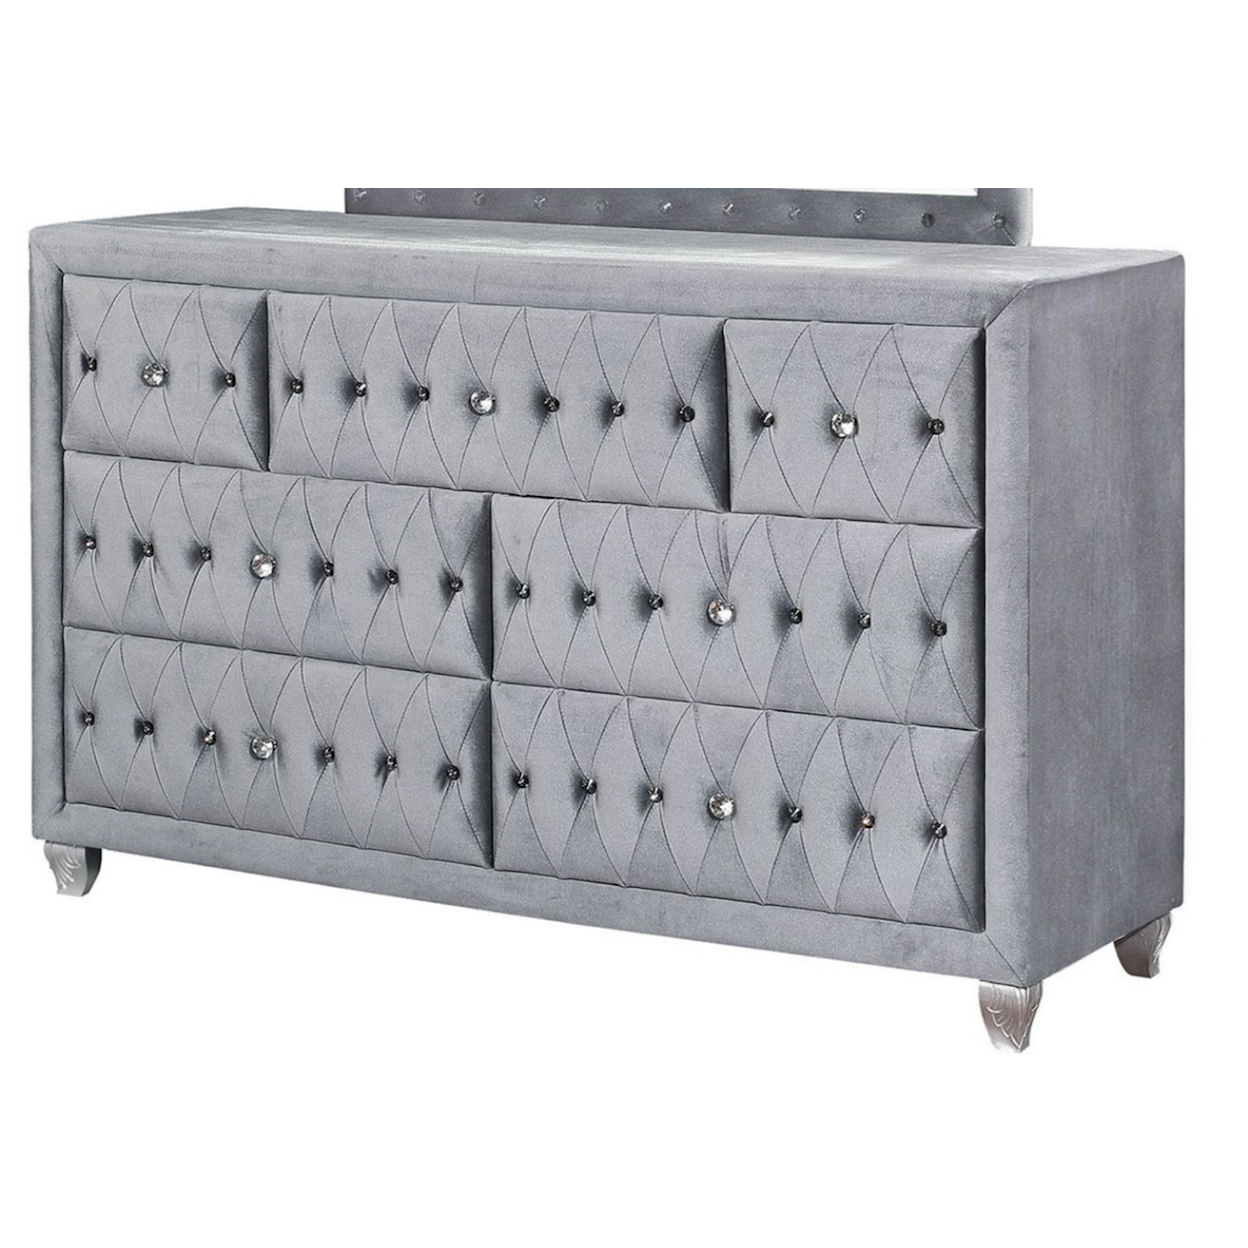 Furniture of America Alzir 7-Drawer Dresser with Button Tufting